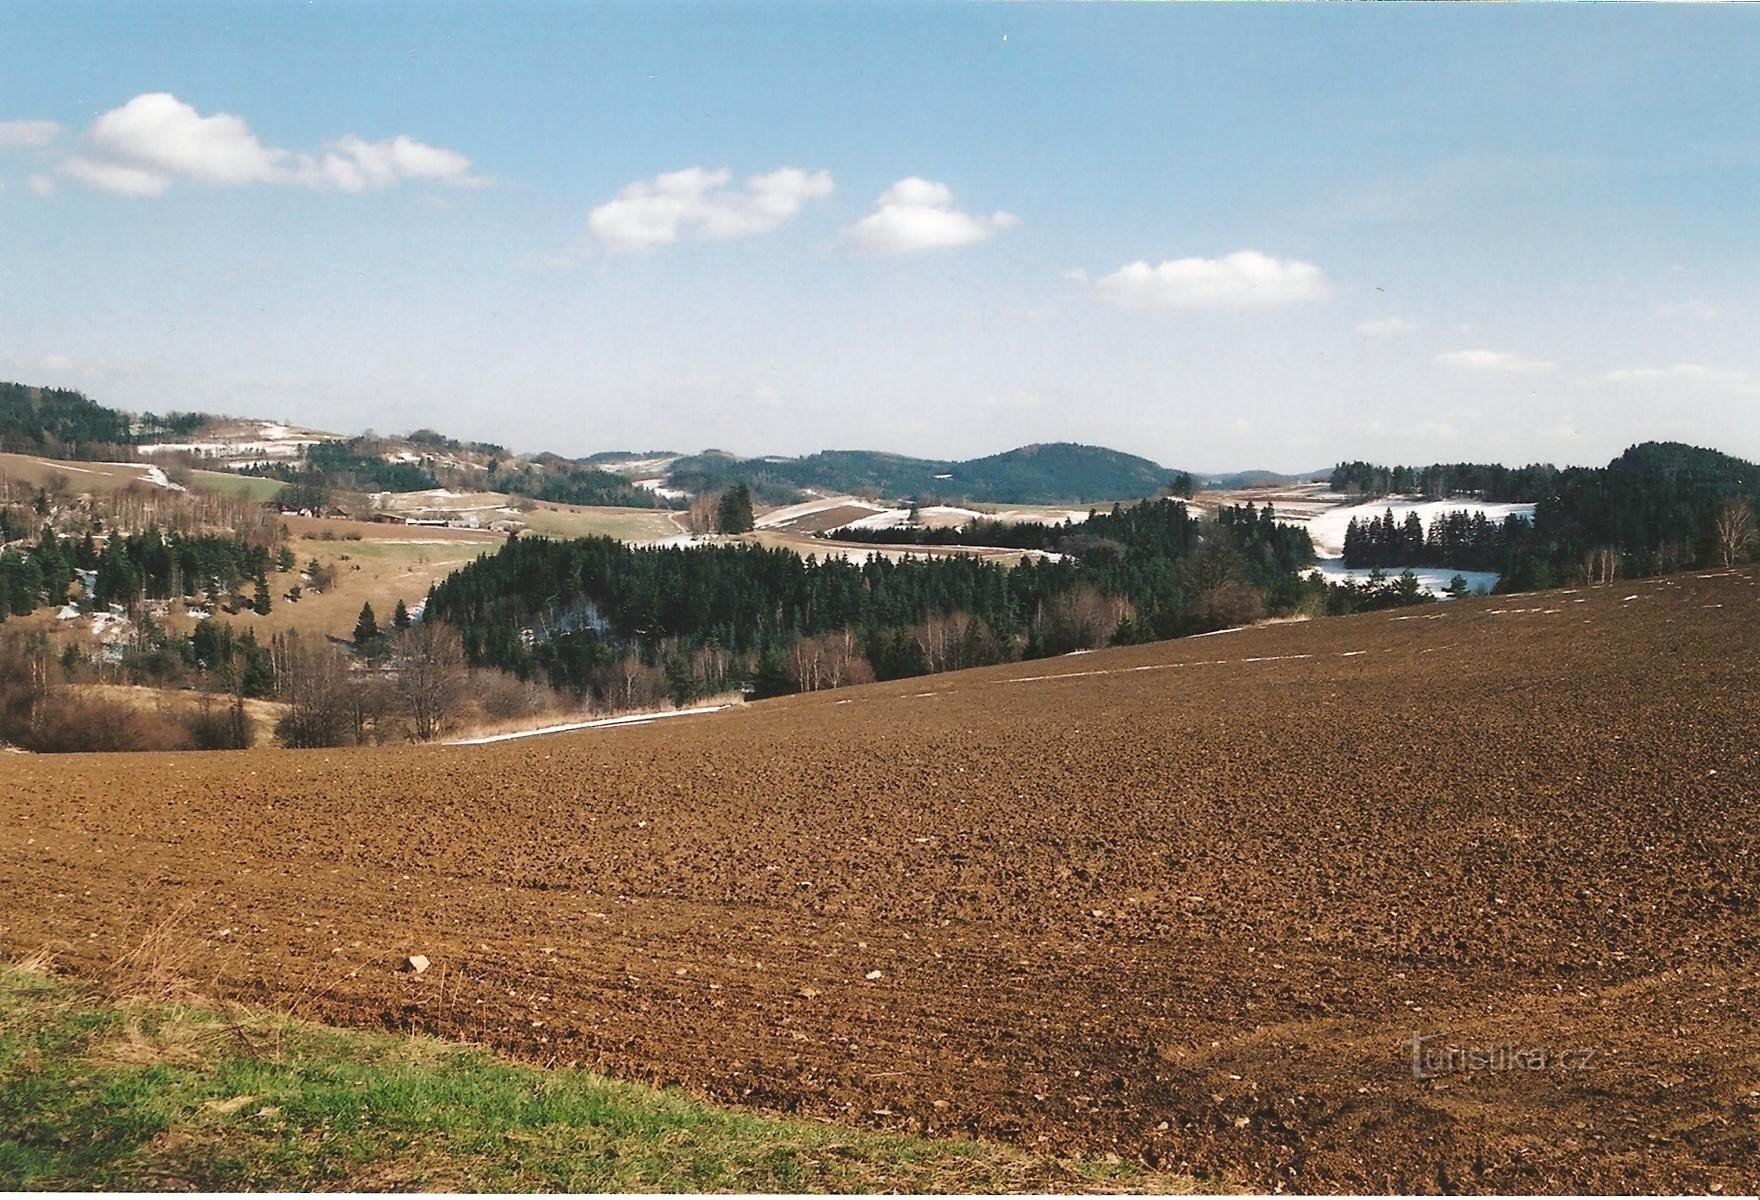 View of the southern part of Hornolesko